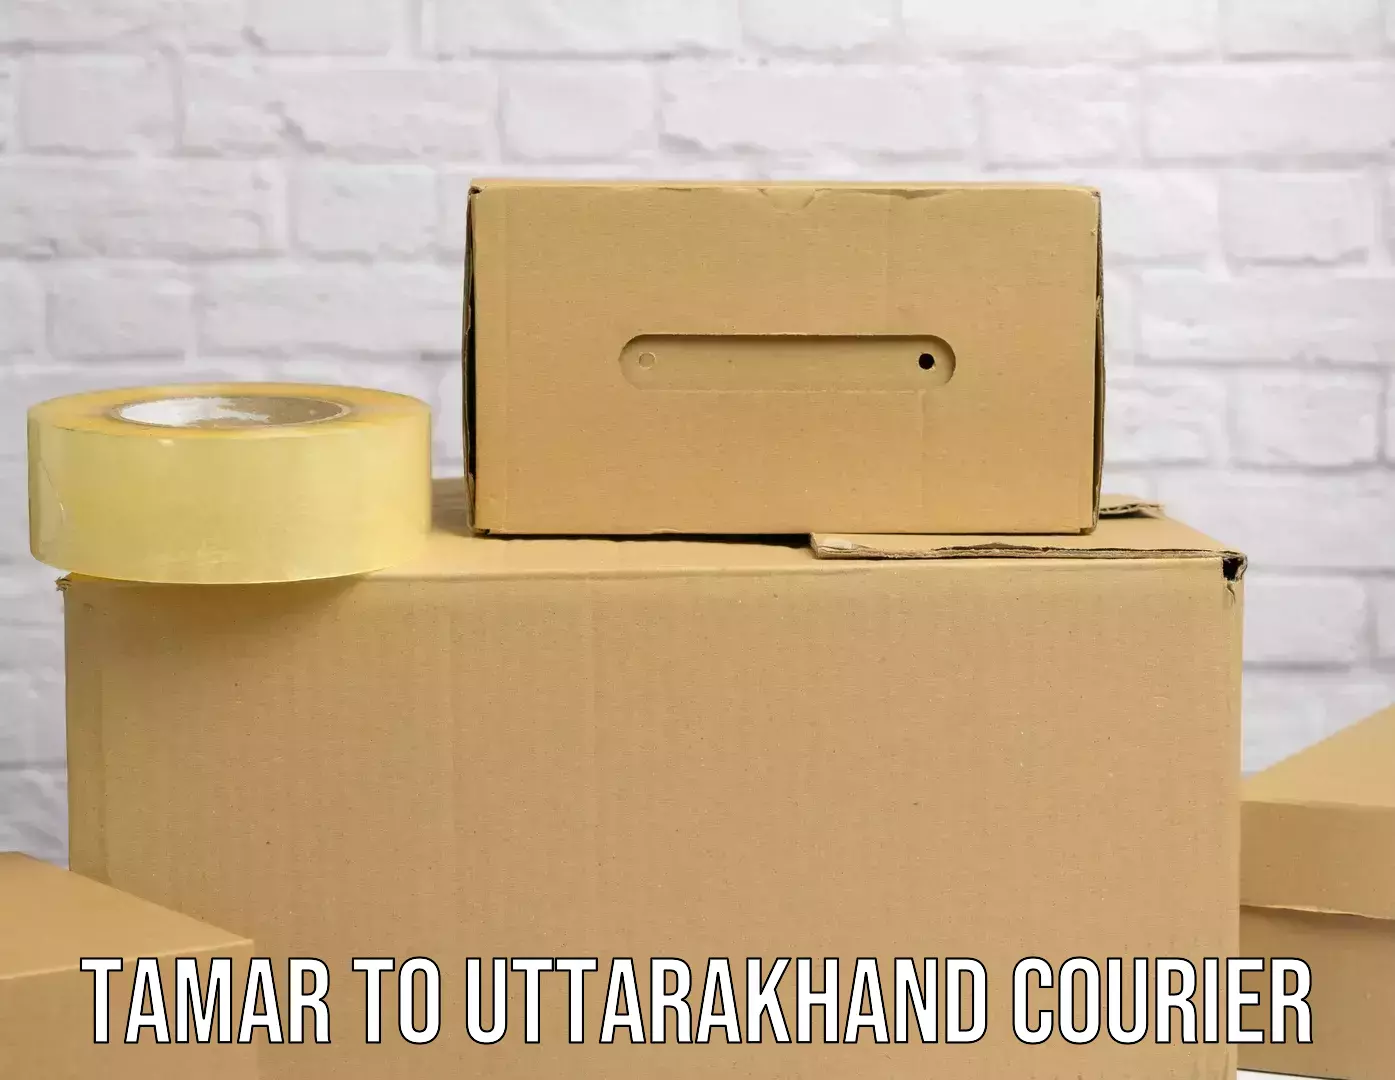 State-of-the-art courier technology Tamar to Uttarakhand